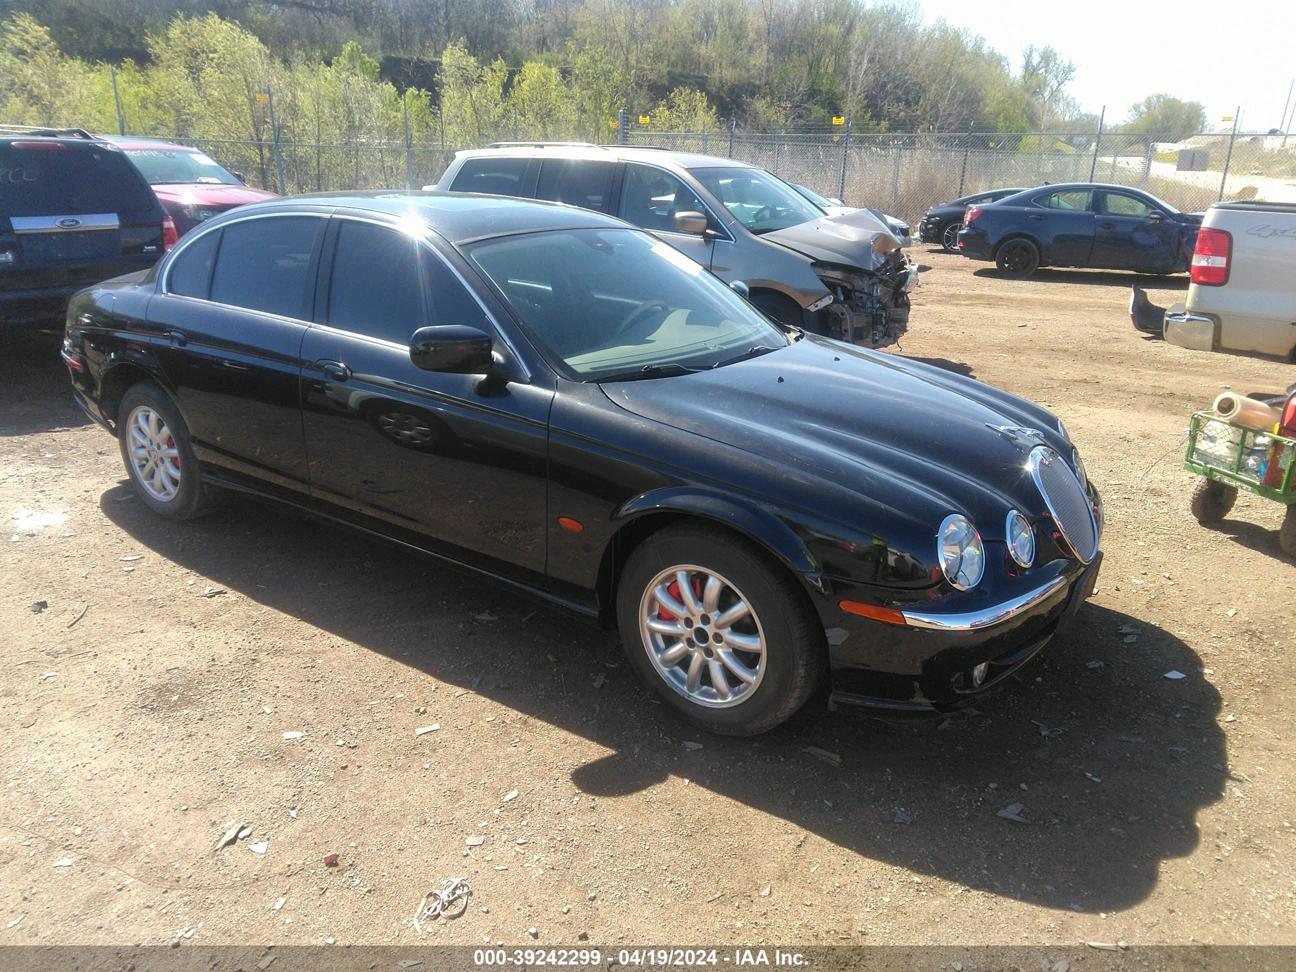 vin: SAJDA01PX2GM29040 SAJDA01PX2GM29040 2002 jaguar s-type 4000 for Sale in 60118, 605 Healy Road, East Dundee, Illinois, USA